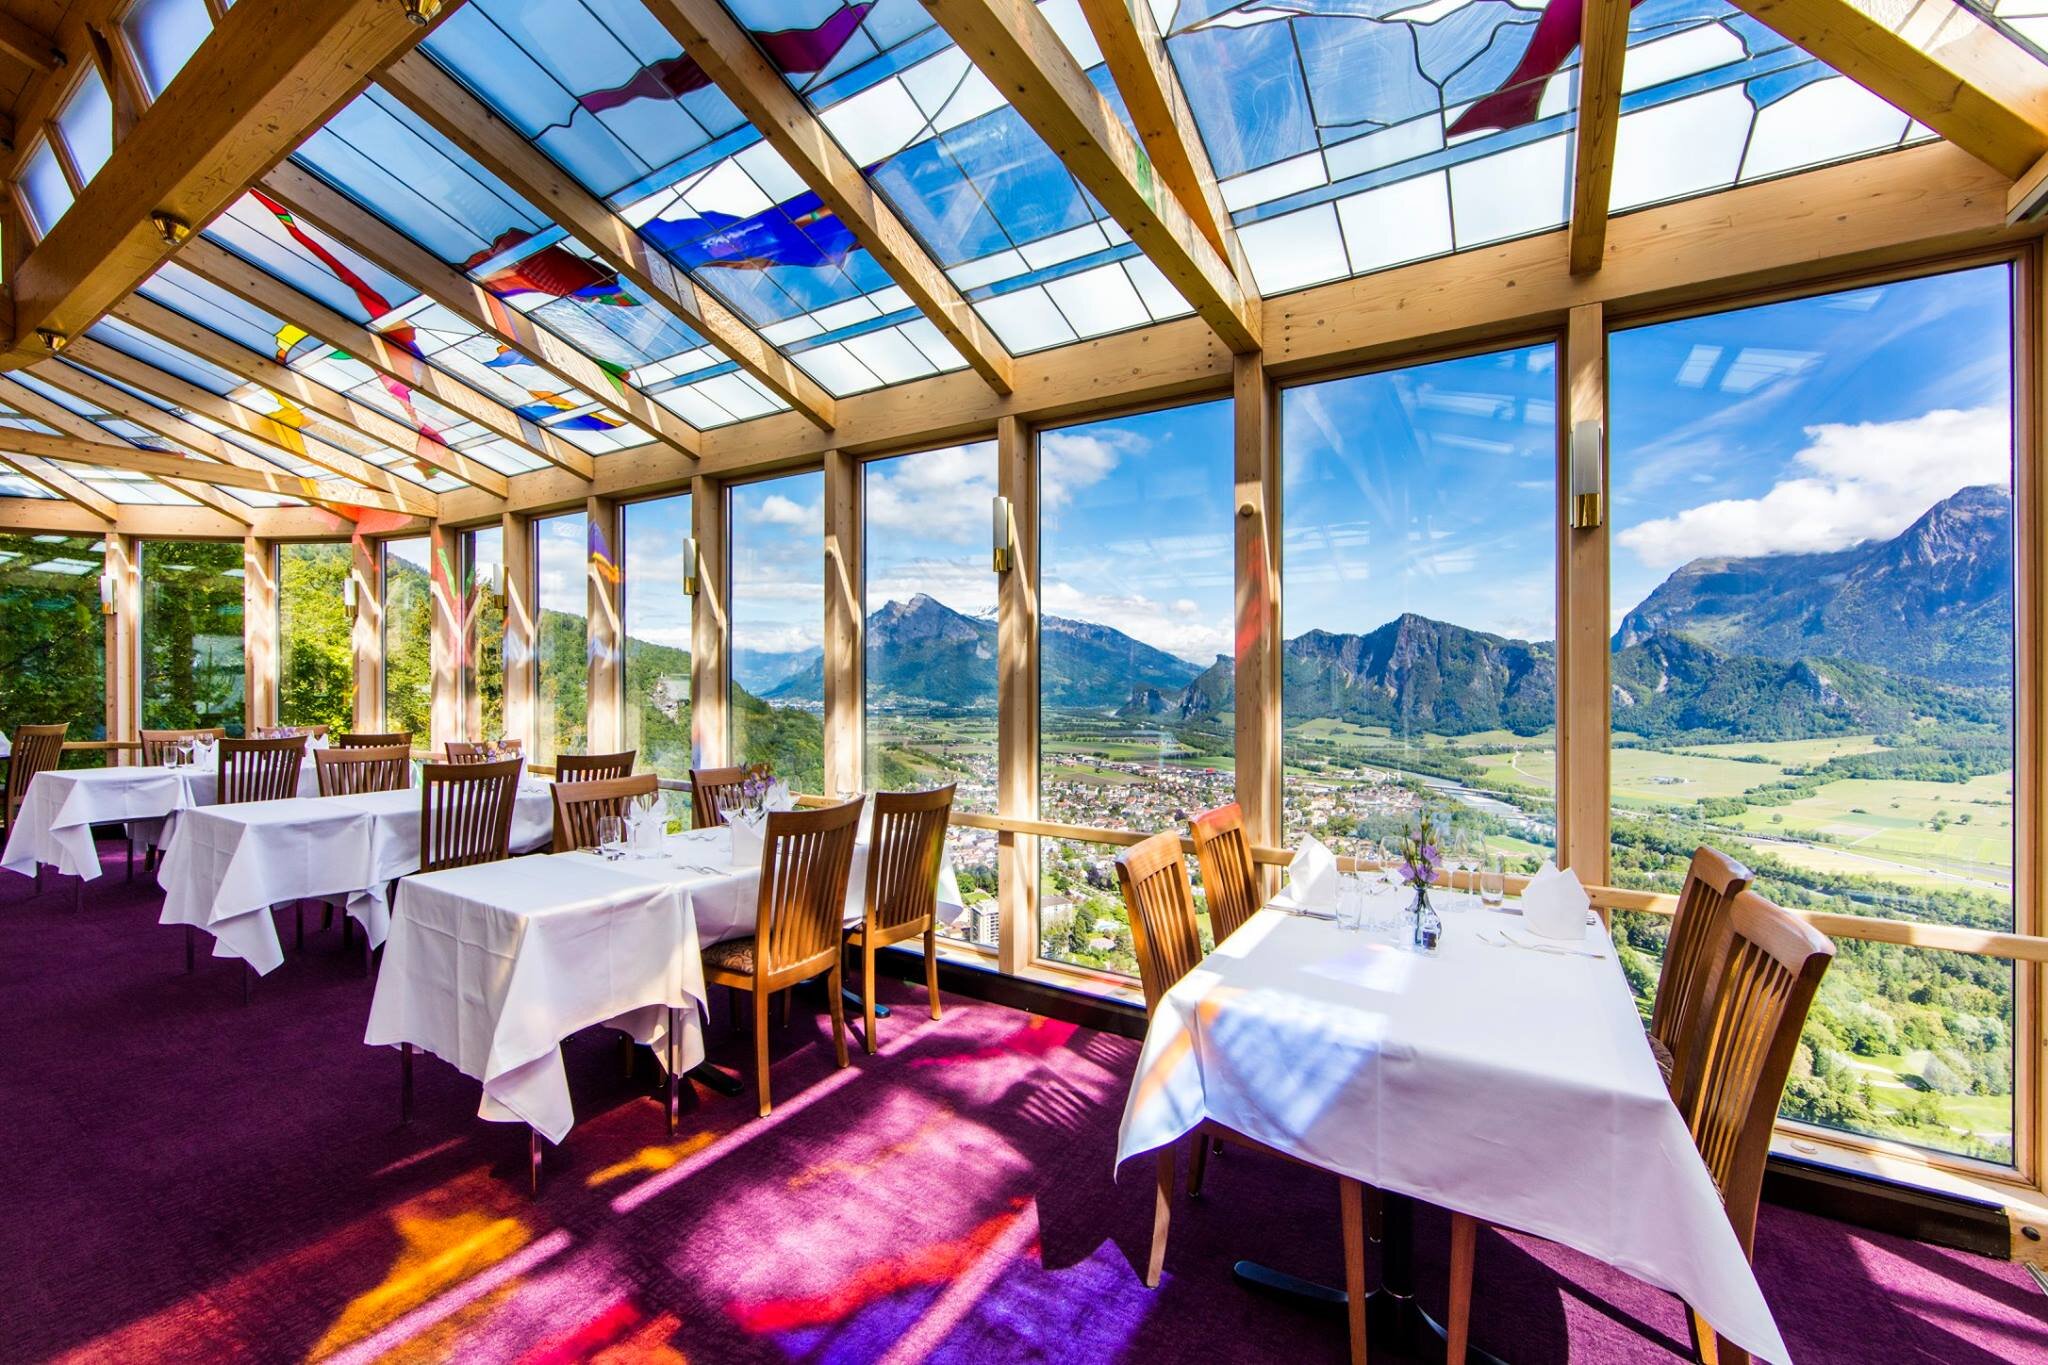 Dining Room Overlooking Mountains.jpg